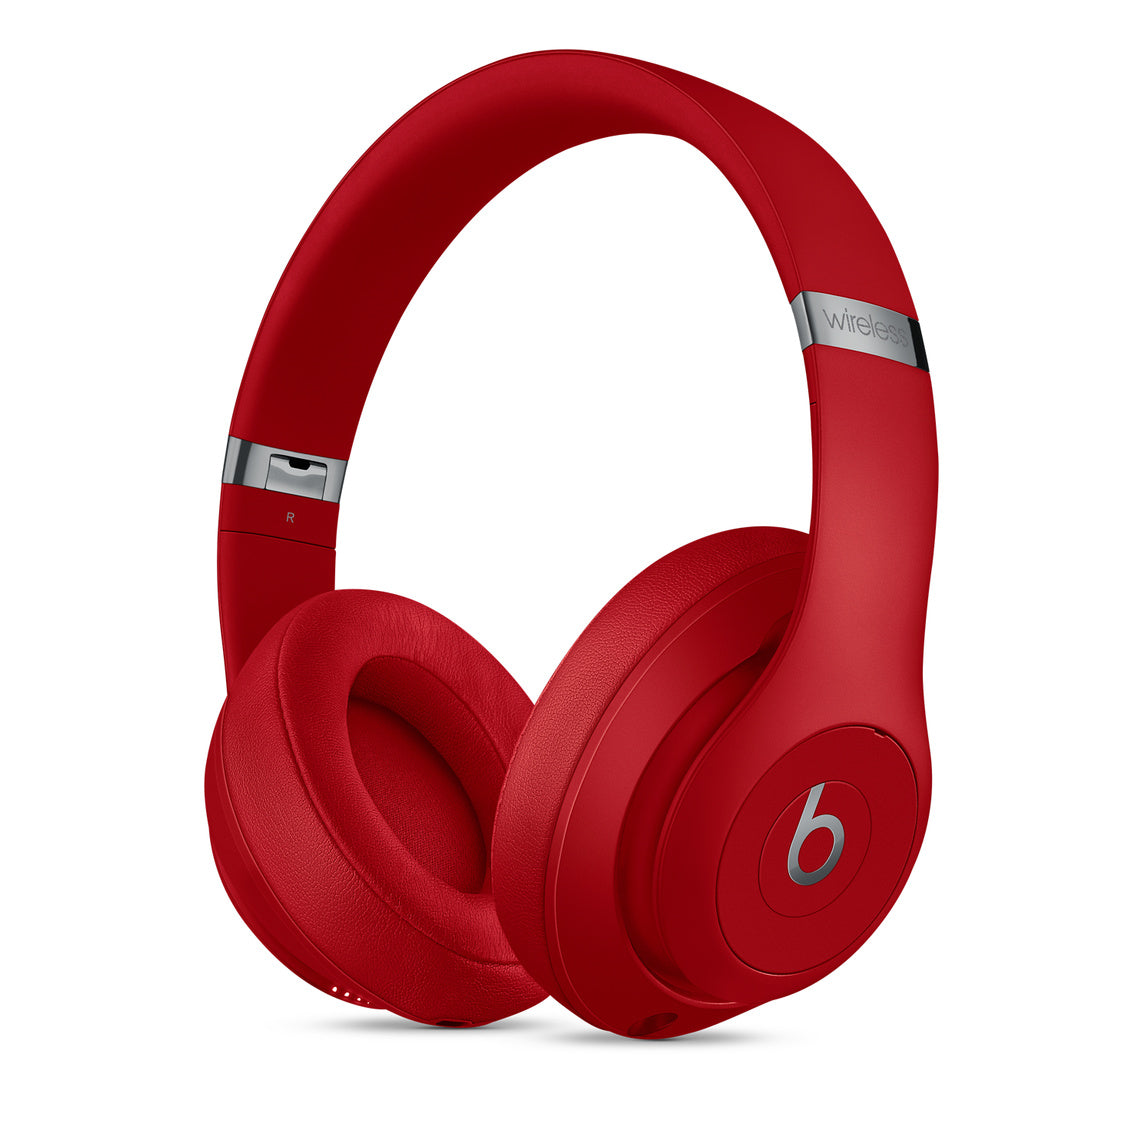 Beats Studio 3 Wireless Noise Cancelling Over-Ear Headphones (Red) MX412PA/A